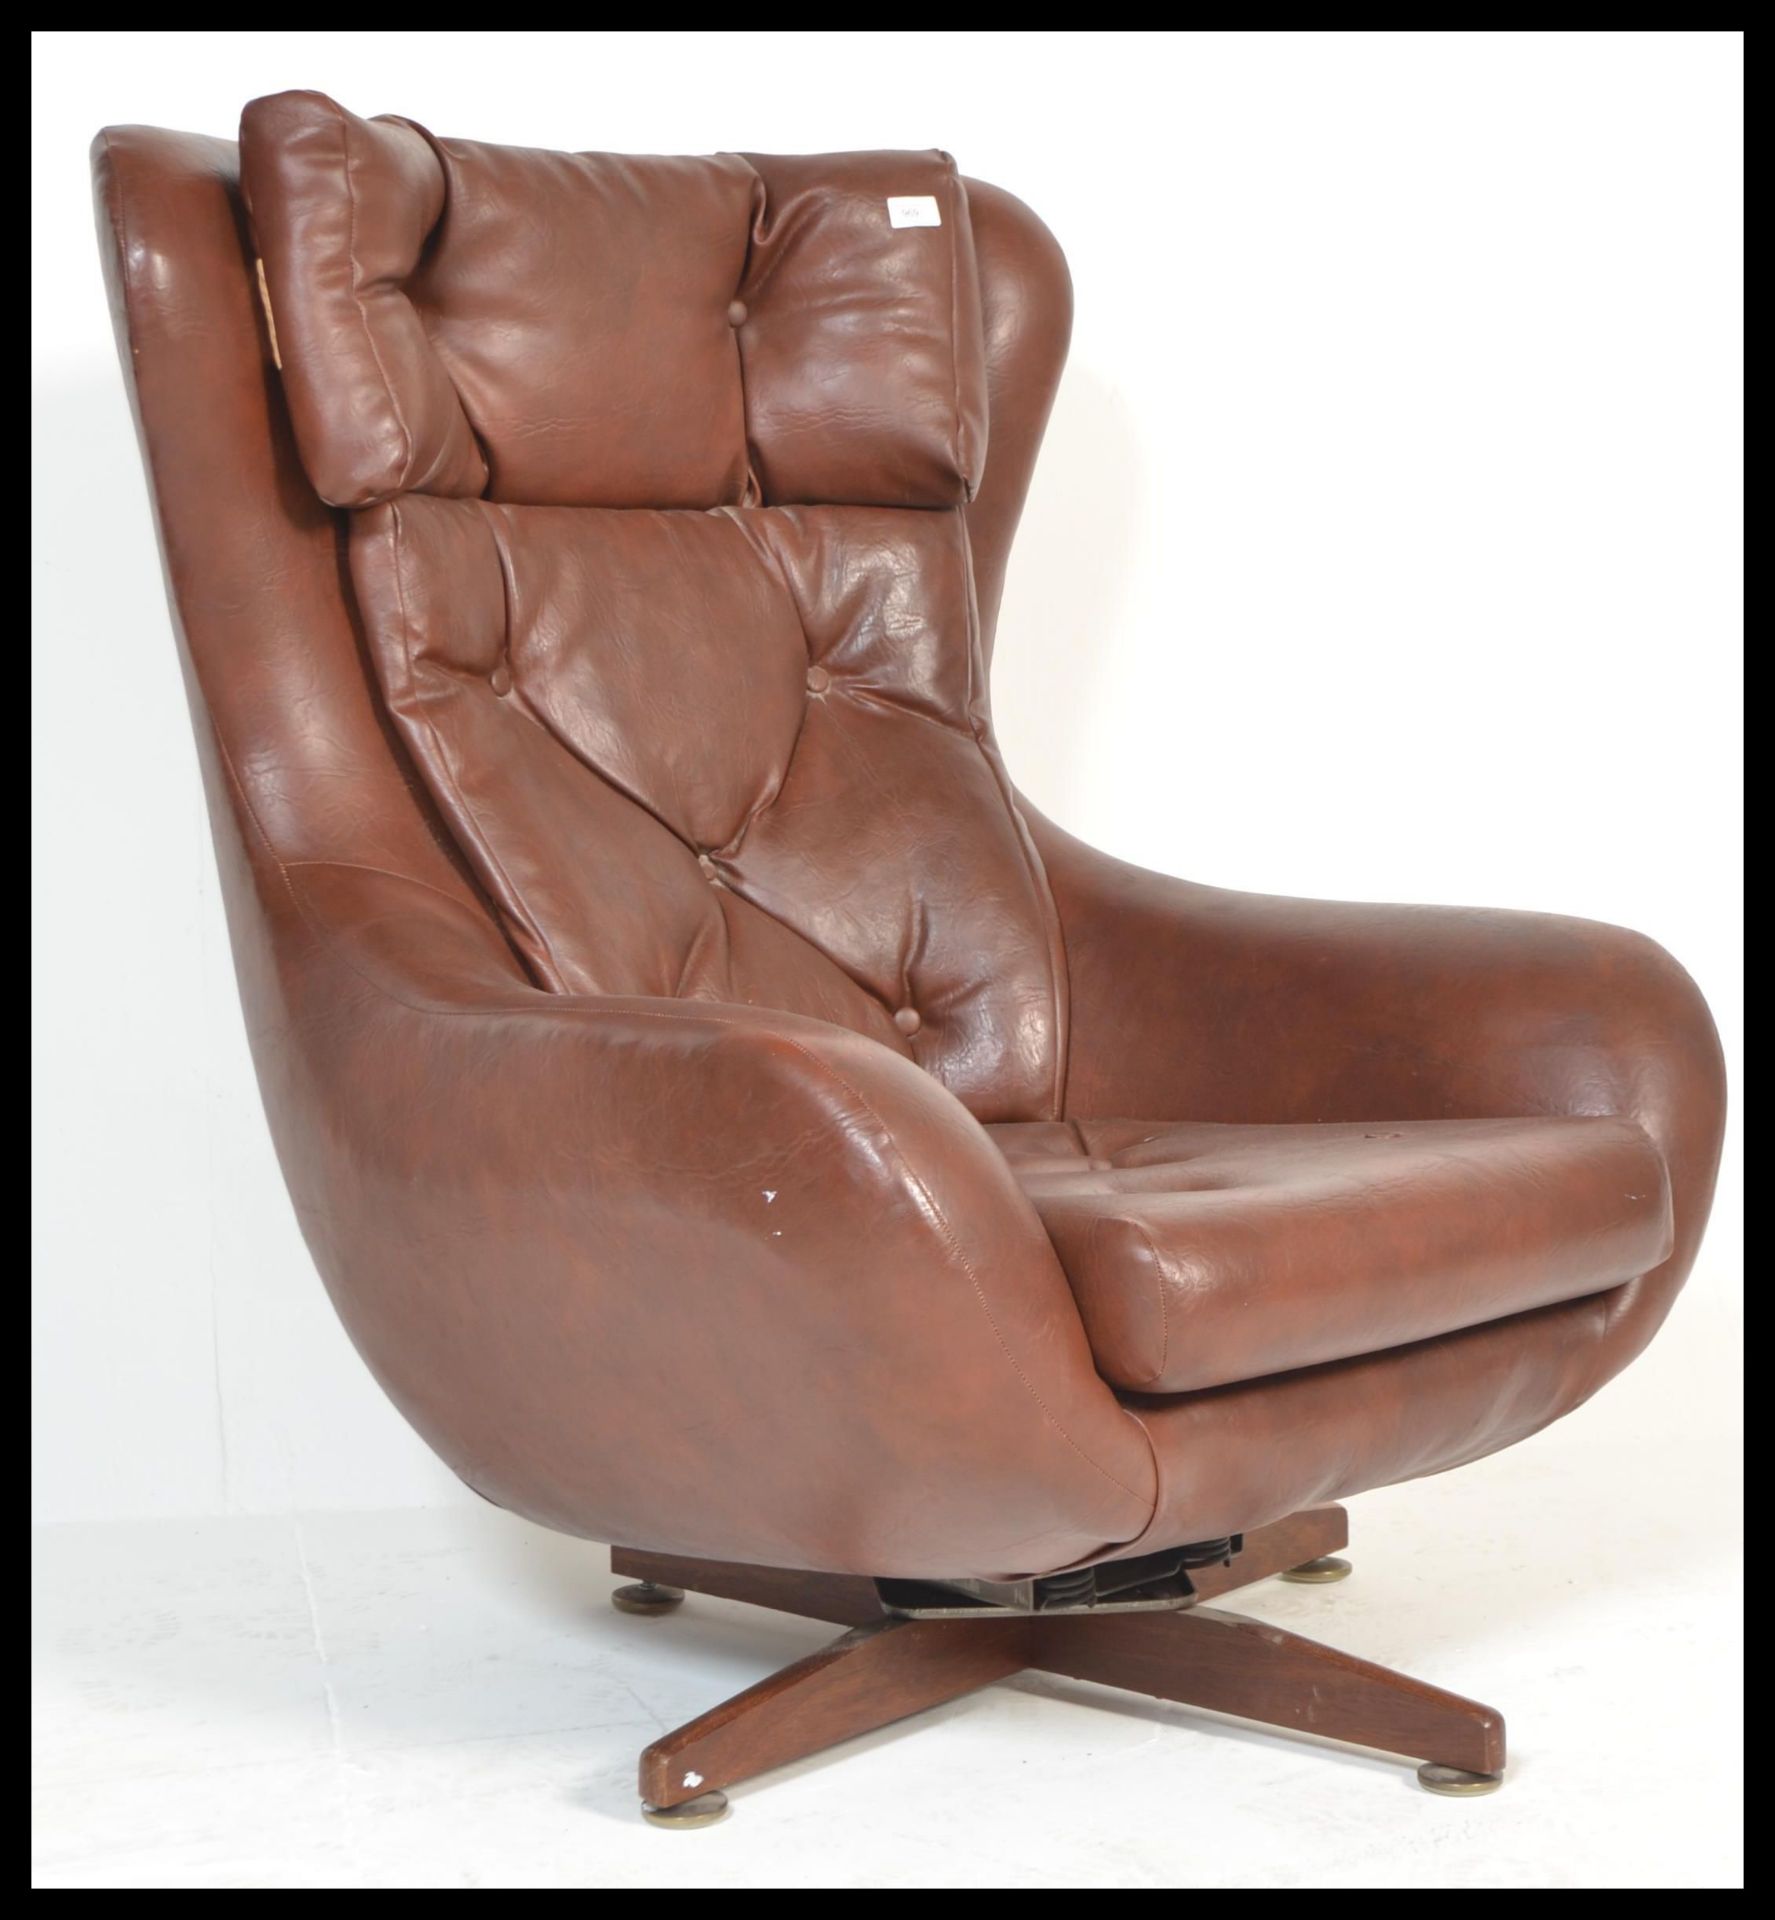 A retro / vintage 20th Century Parker Knoll Statesman swivel easy chair, upholstered in a tan button